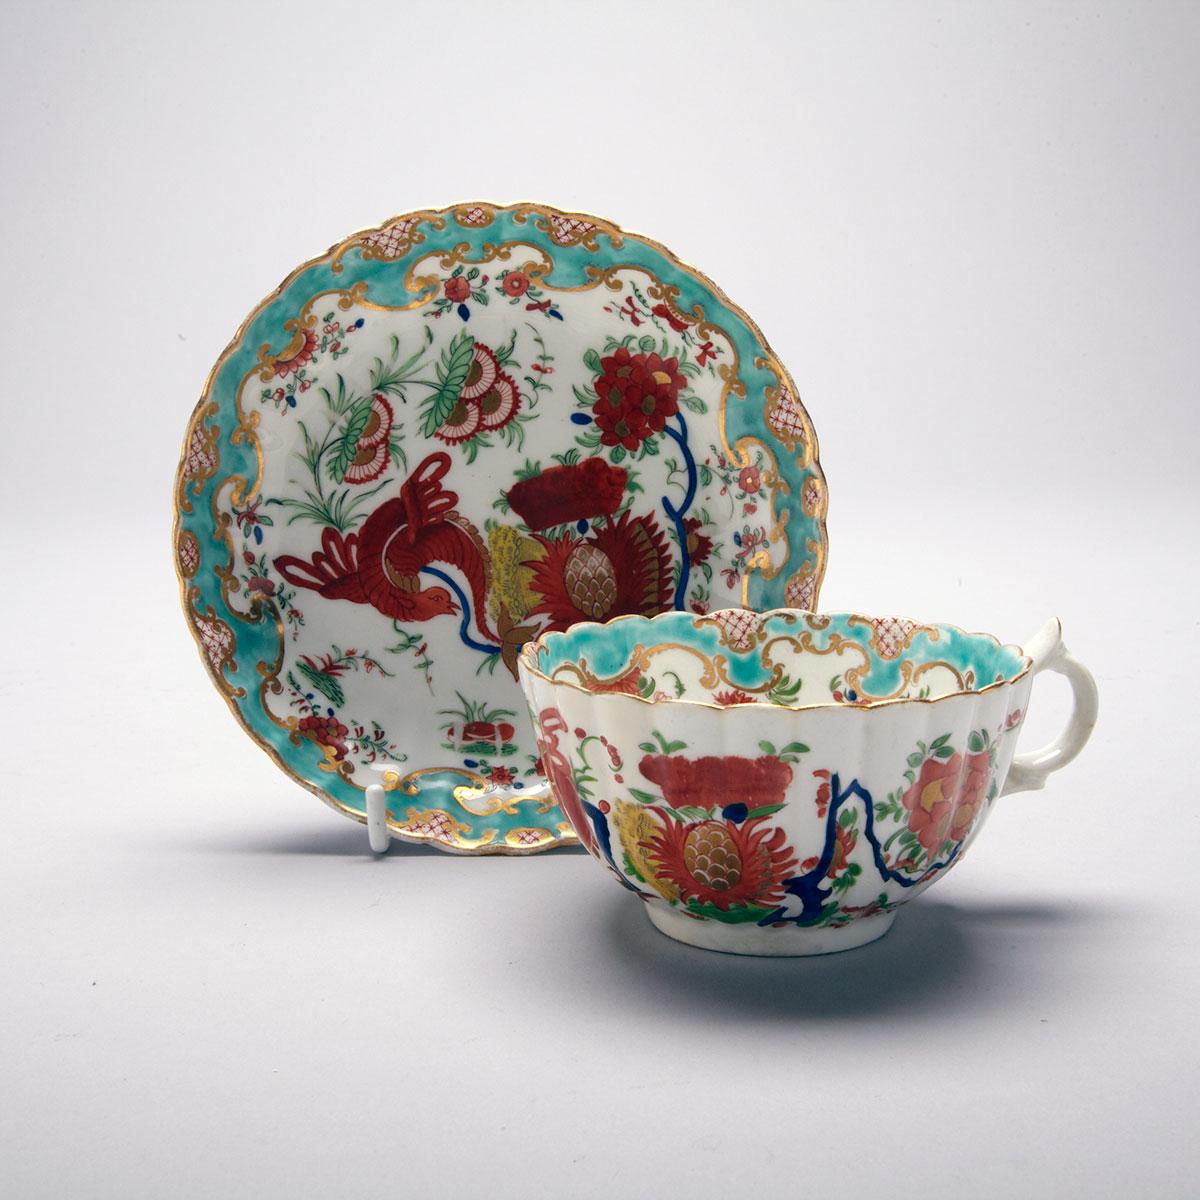 Derby ‘Jabberwocky’ Pattern Fluted Tea Cup and Saucer, c.1810